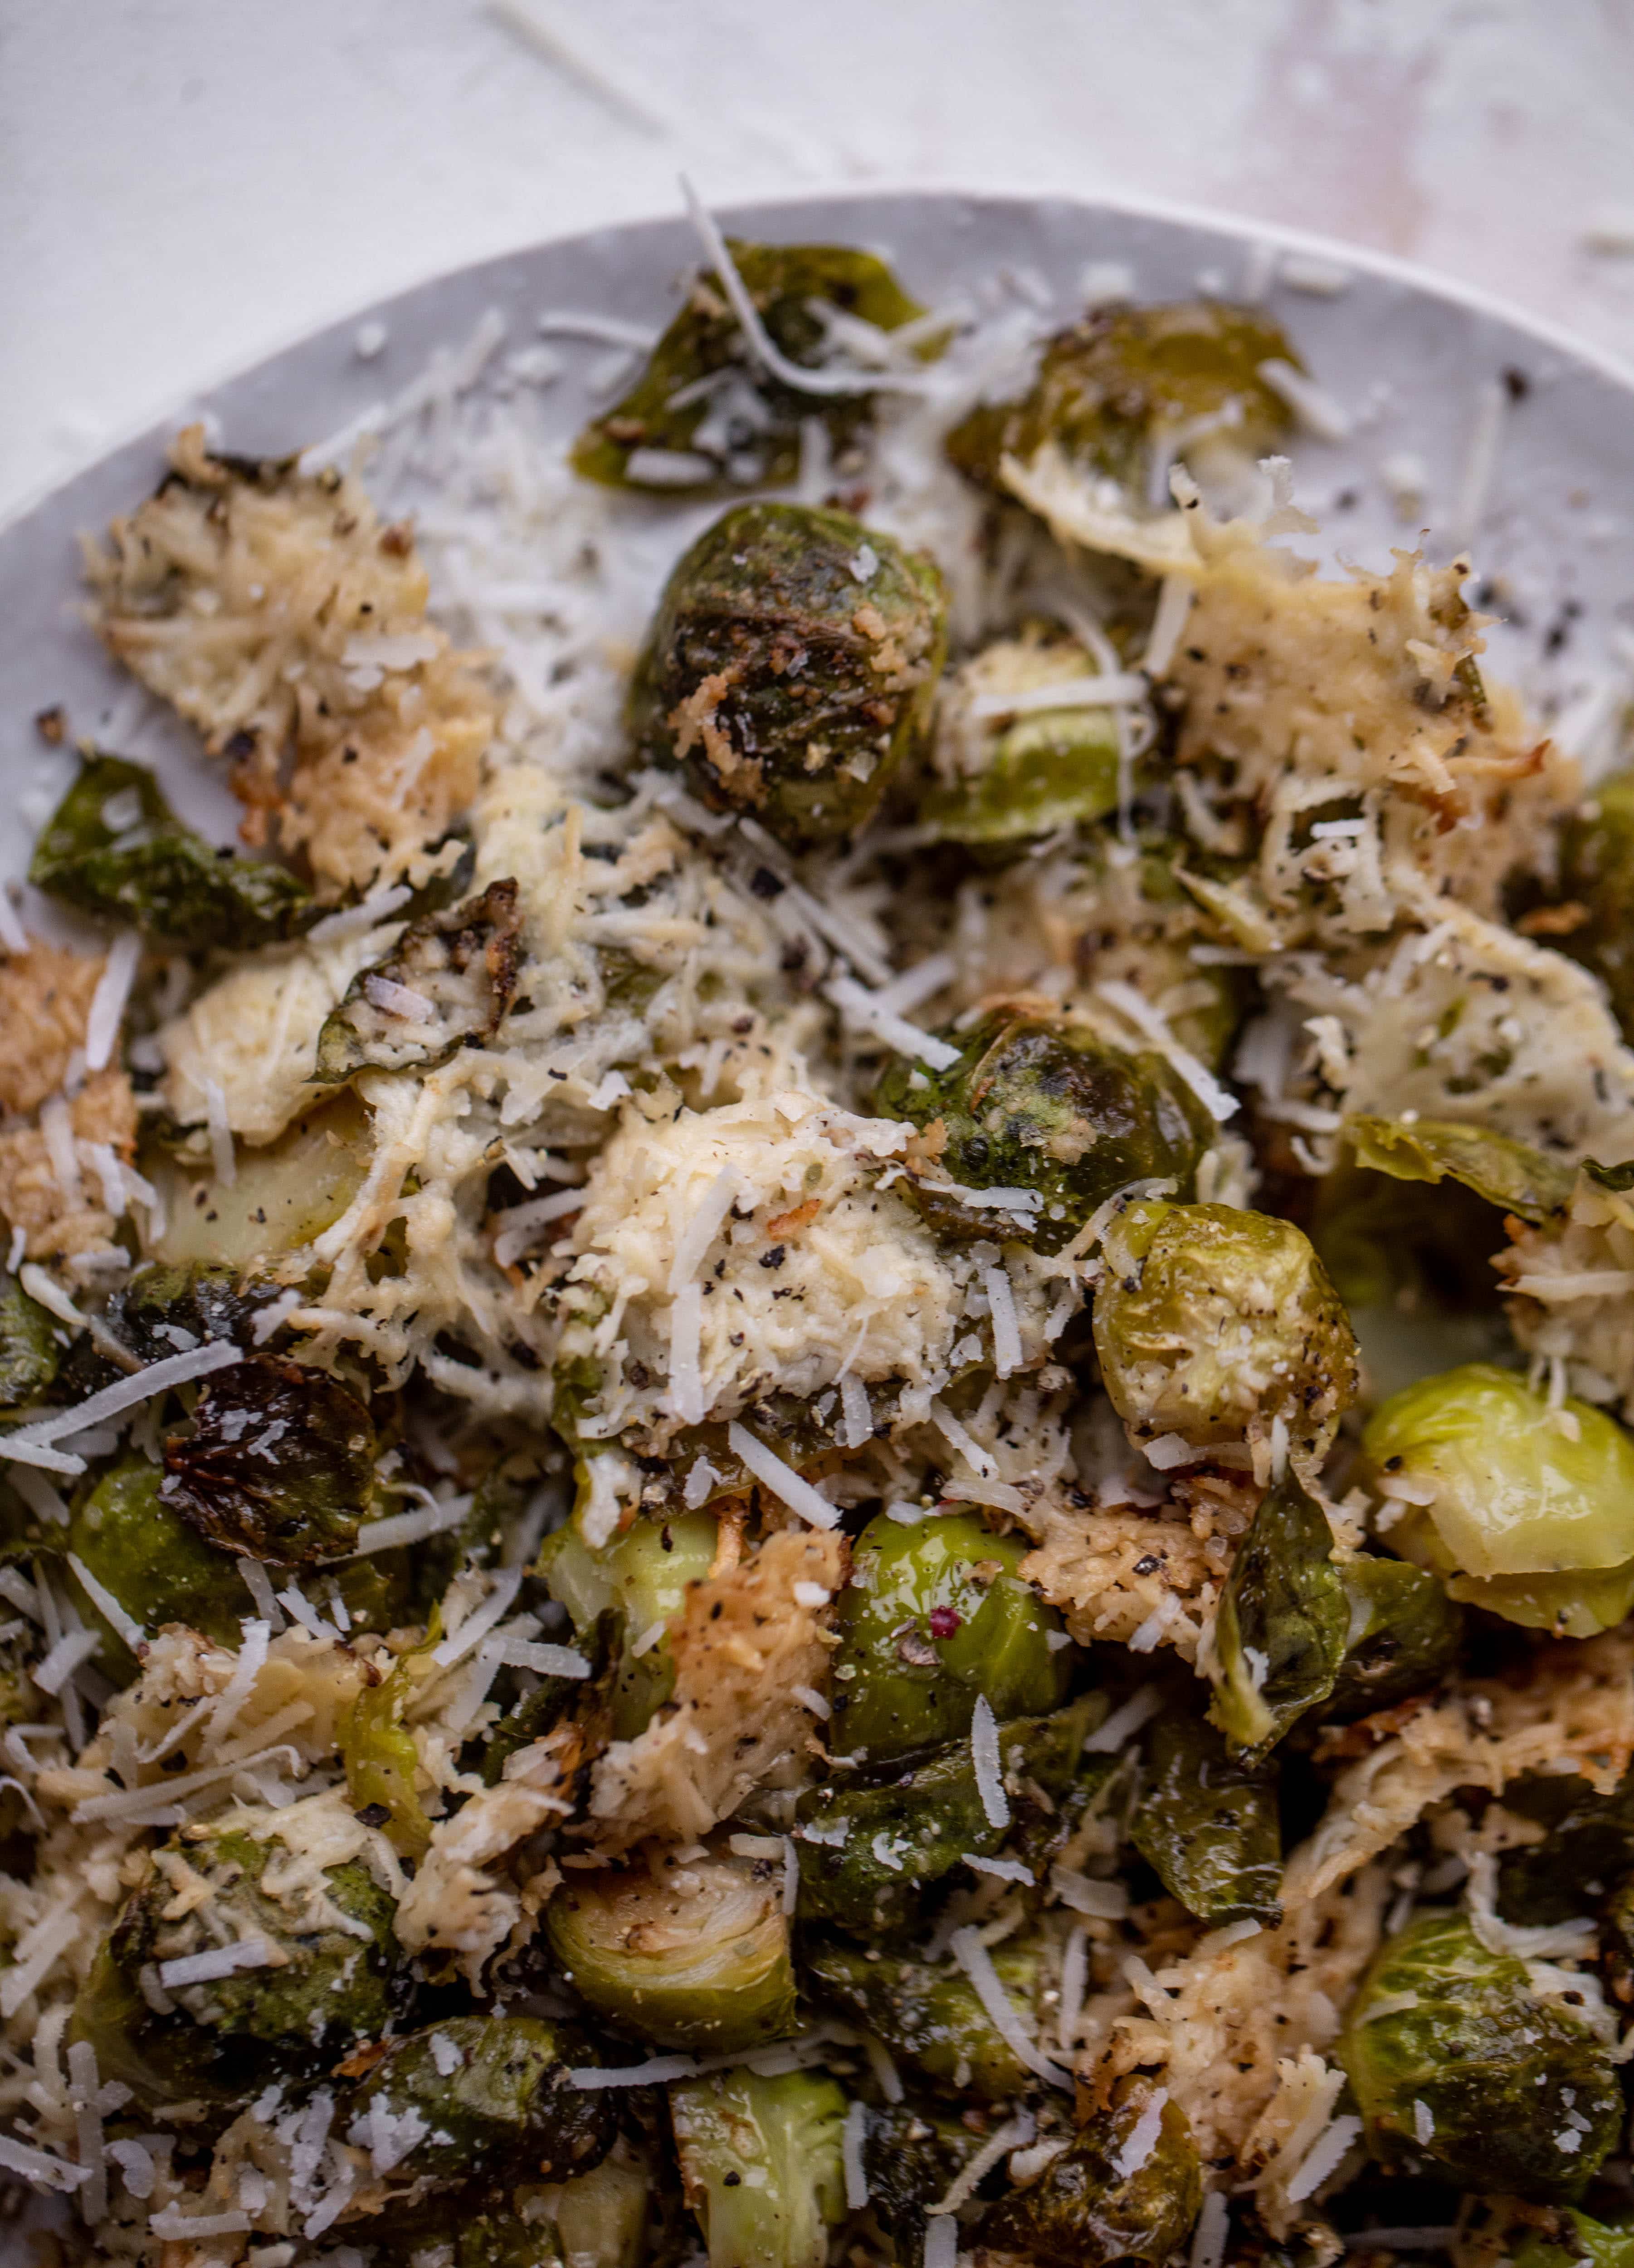 This cacio e pepe brussels are out of the world. Roasted until crisp, topped with tons of black pepper and salty pecorino cheese. Yum.